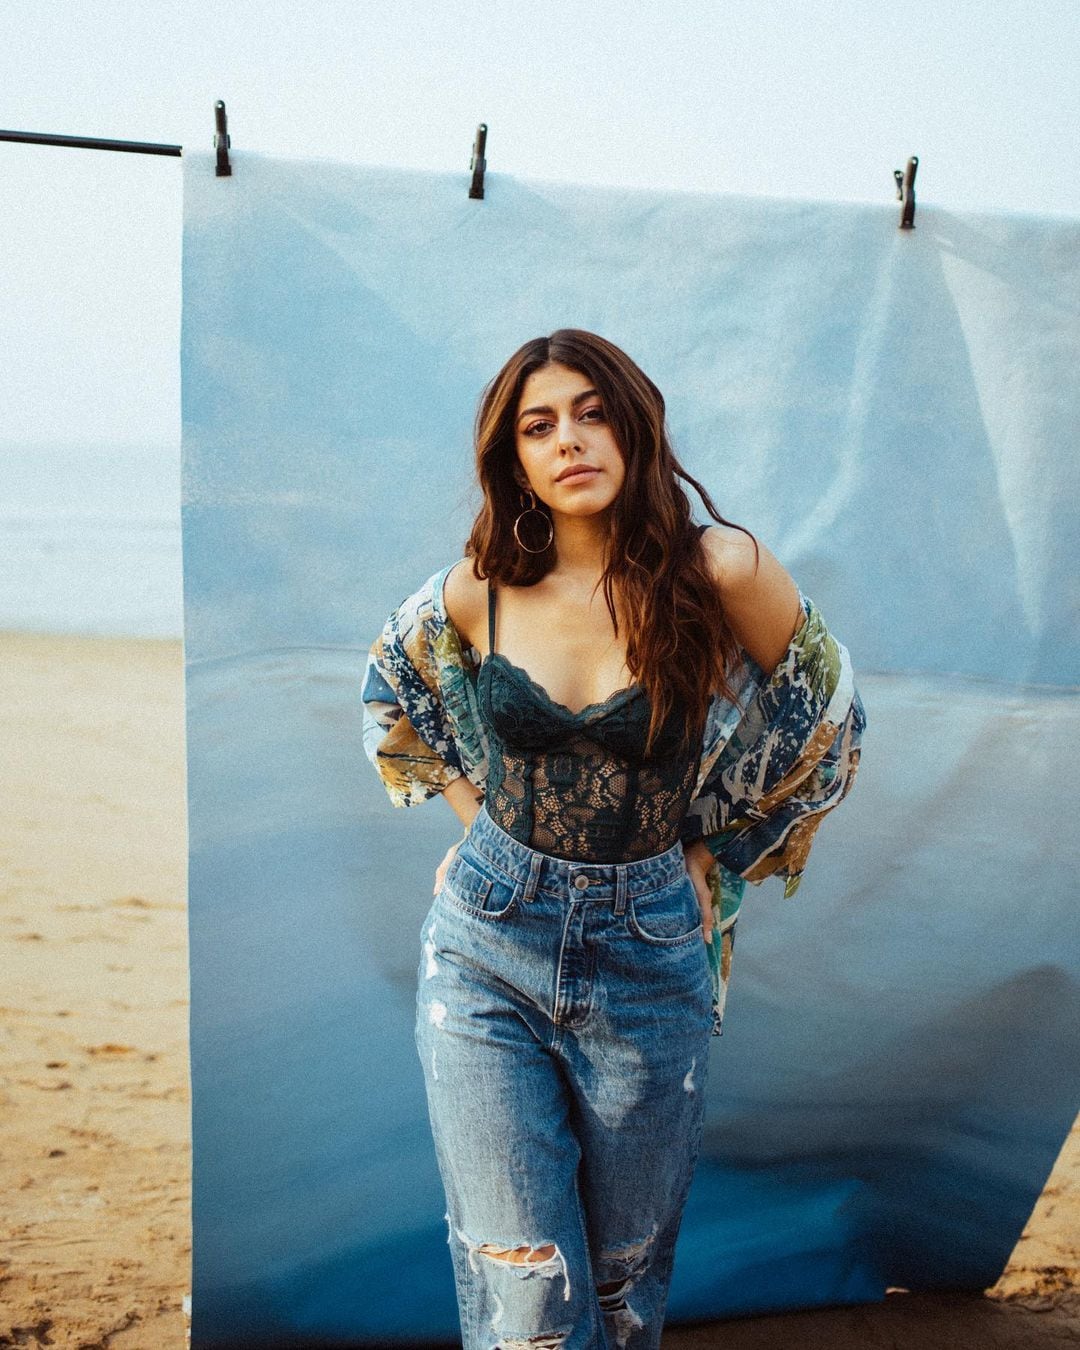 Alaya F looks smart in the lace top, ripped denims and printed shirt